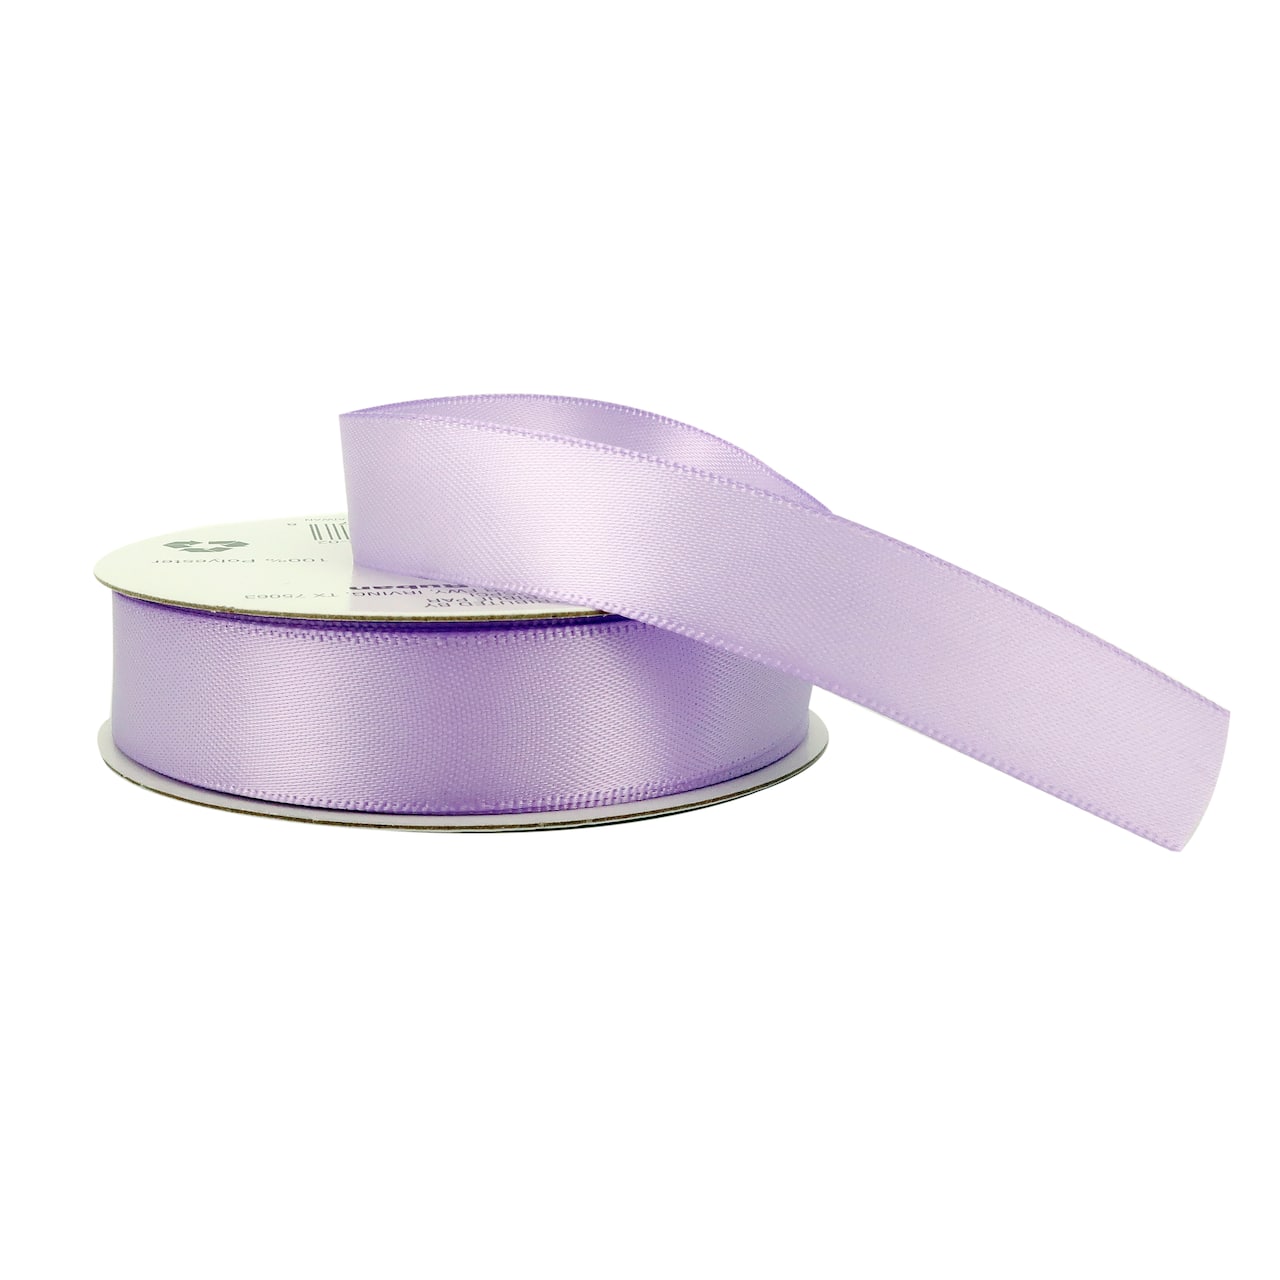 12 Pack: 5/8 x 7yd. Double Faced Satin Ribbon by Celebrate It®